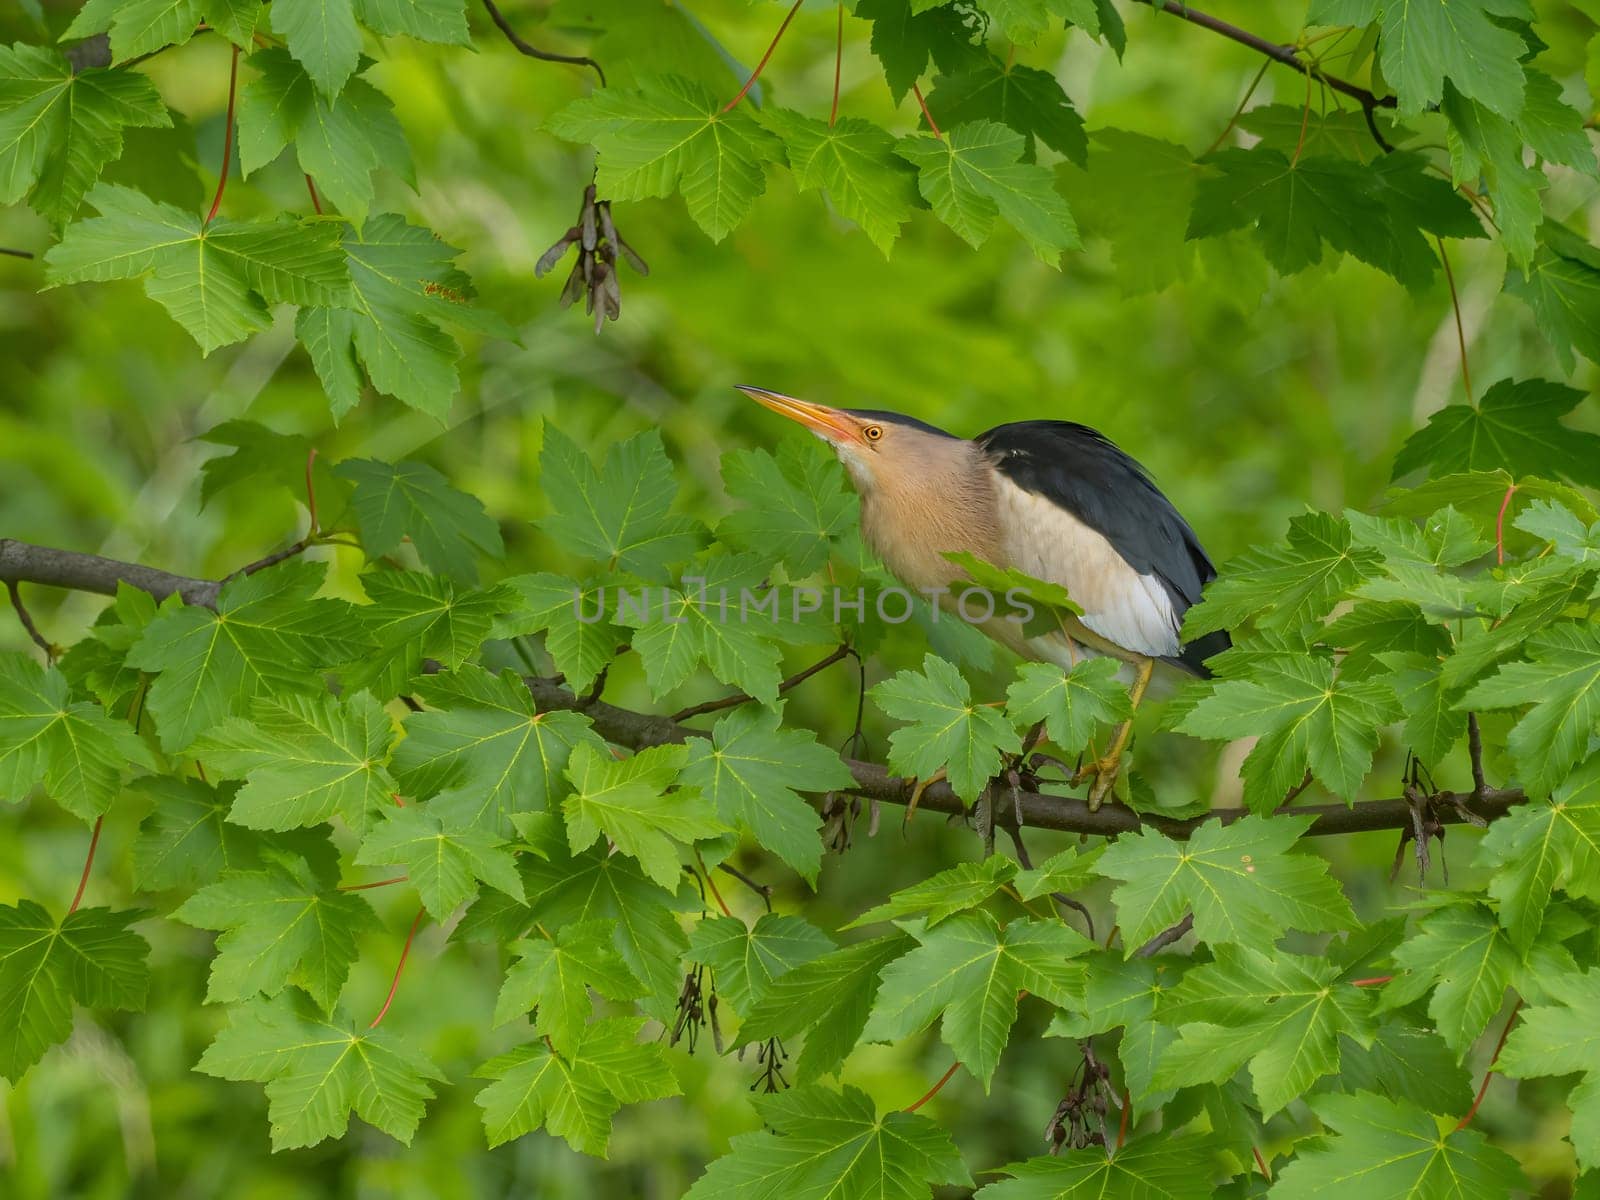 Little Bittern perched on a branch, its vibrant feathers beautifully contrasting against the lush green maple leaves.